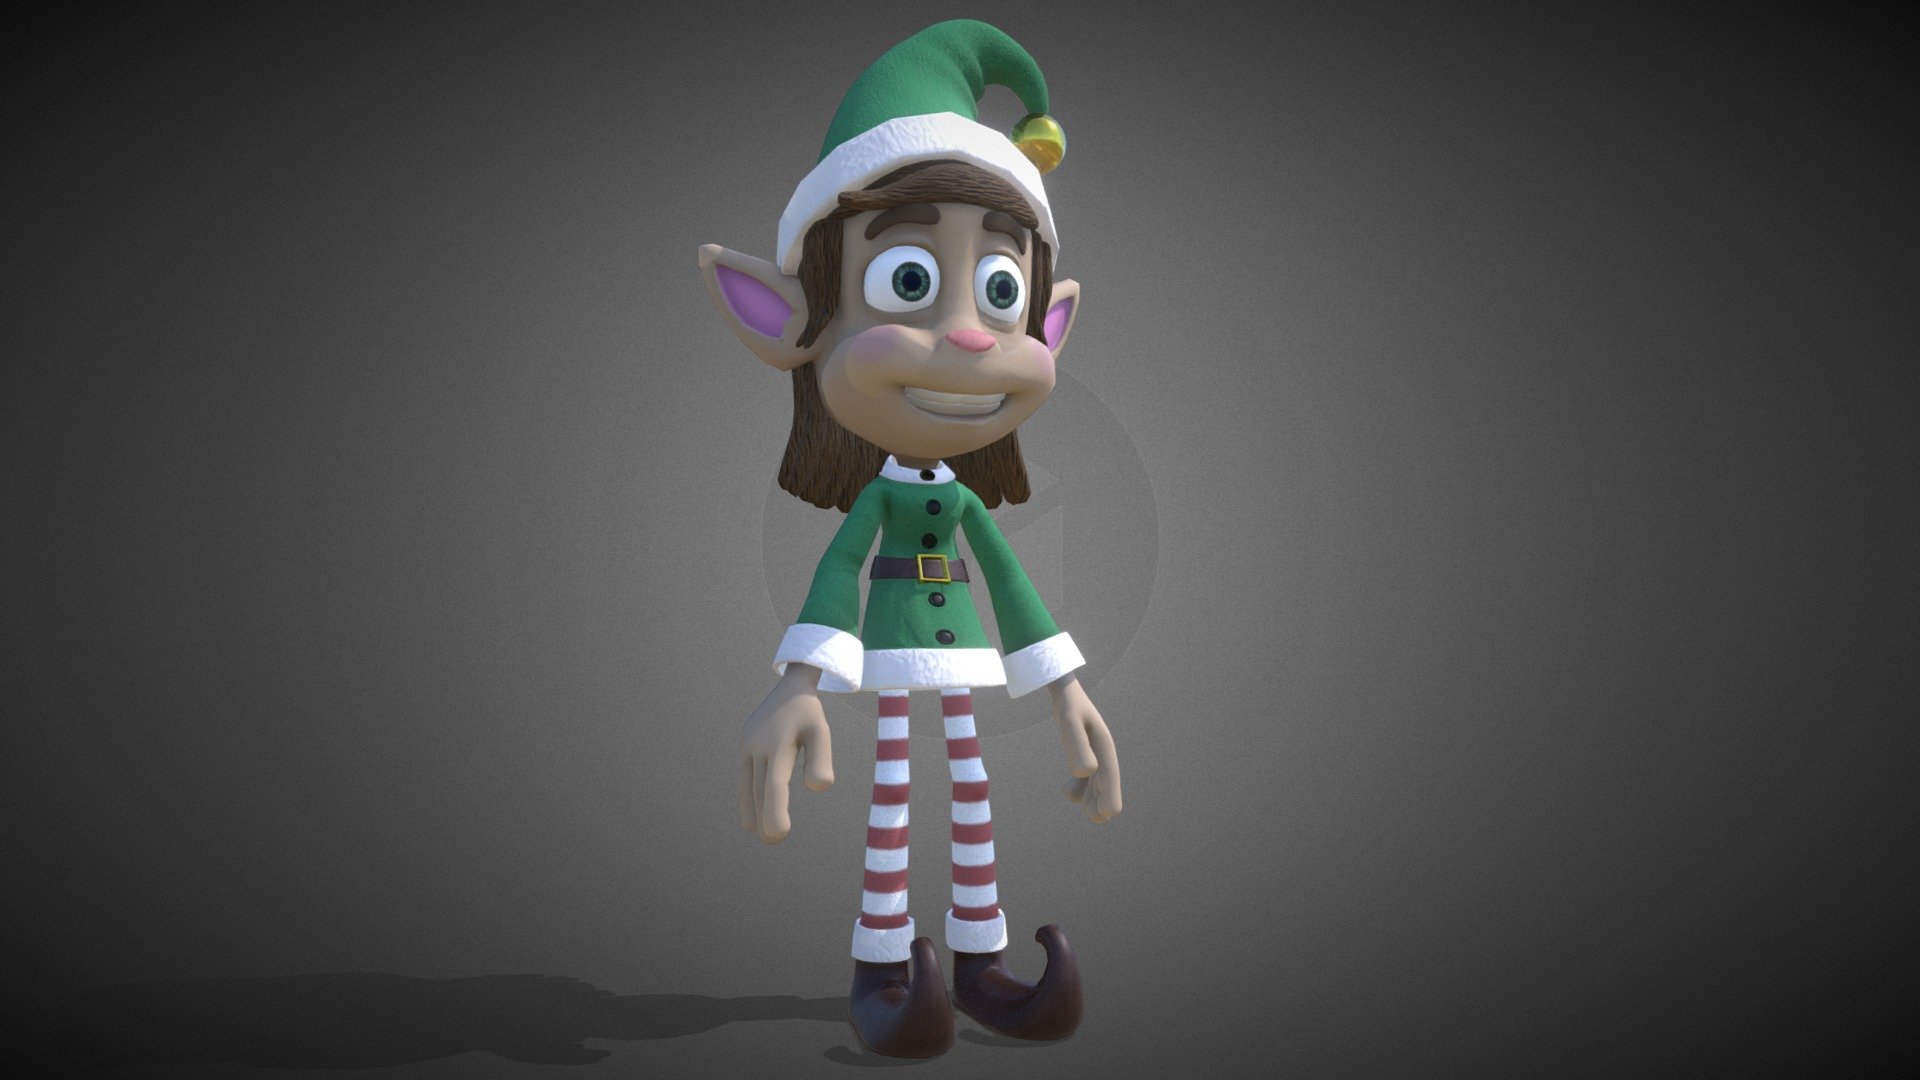 A Holiday Elf character model based off of several references found online.  All modeling was done in Maya, texturing done in Substance Painter, with animation done in Mixamo 3d model